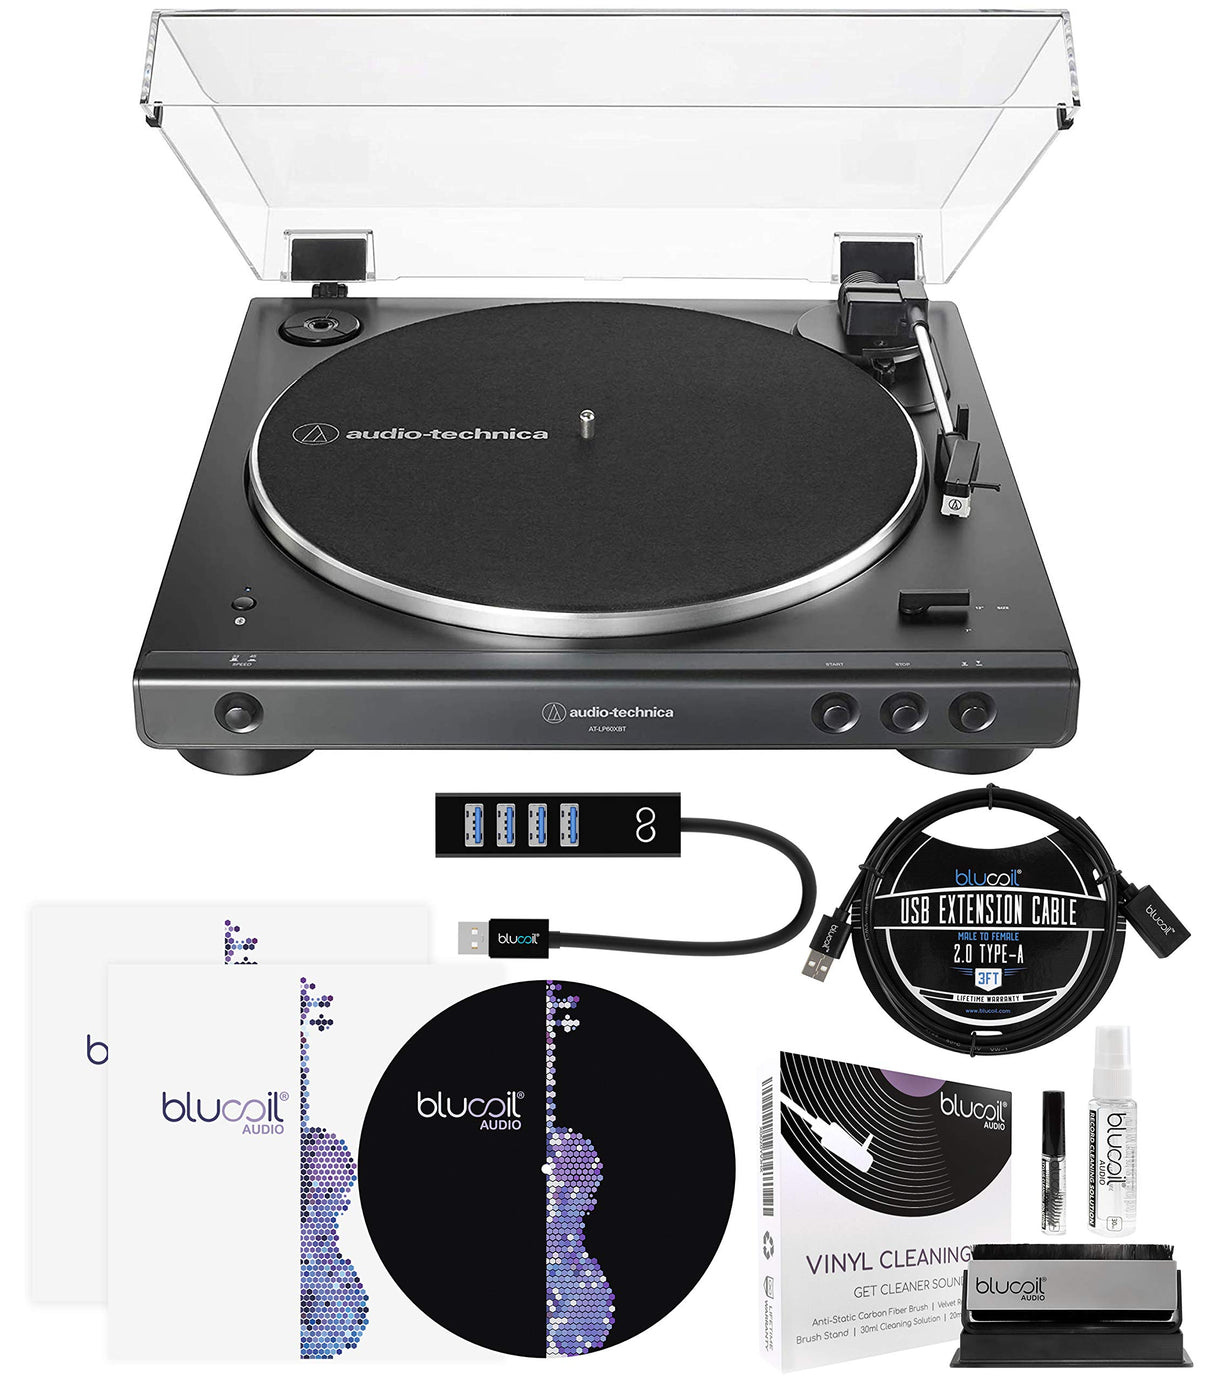 Audio-Technica AT-LP60XUSB USB Belt-Drive Turntable (Black) Bundle with Blucoil Type-A Hub, 3-FT USB 2.0 Type-A Extension Cable, 2-in-1 Vinyl Cleaning Kit, Turntable Slipmat, and 2x LP Inner Sleeves